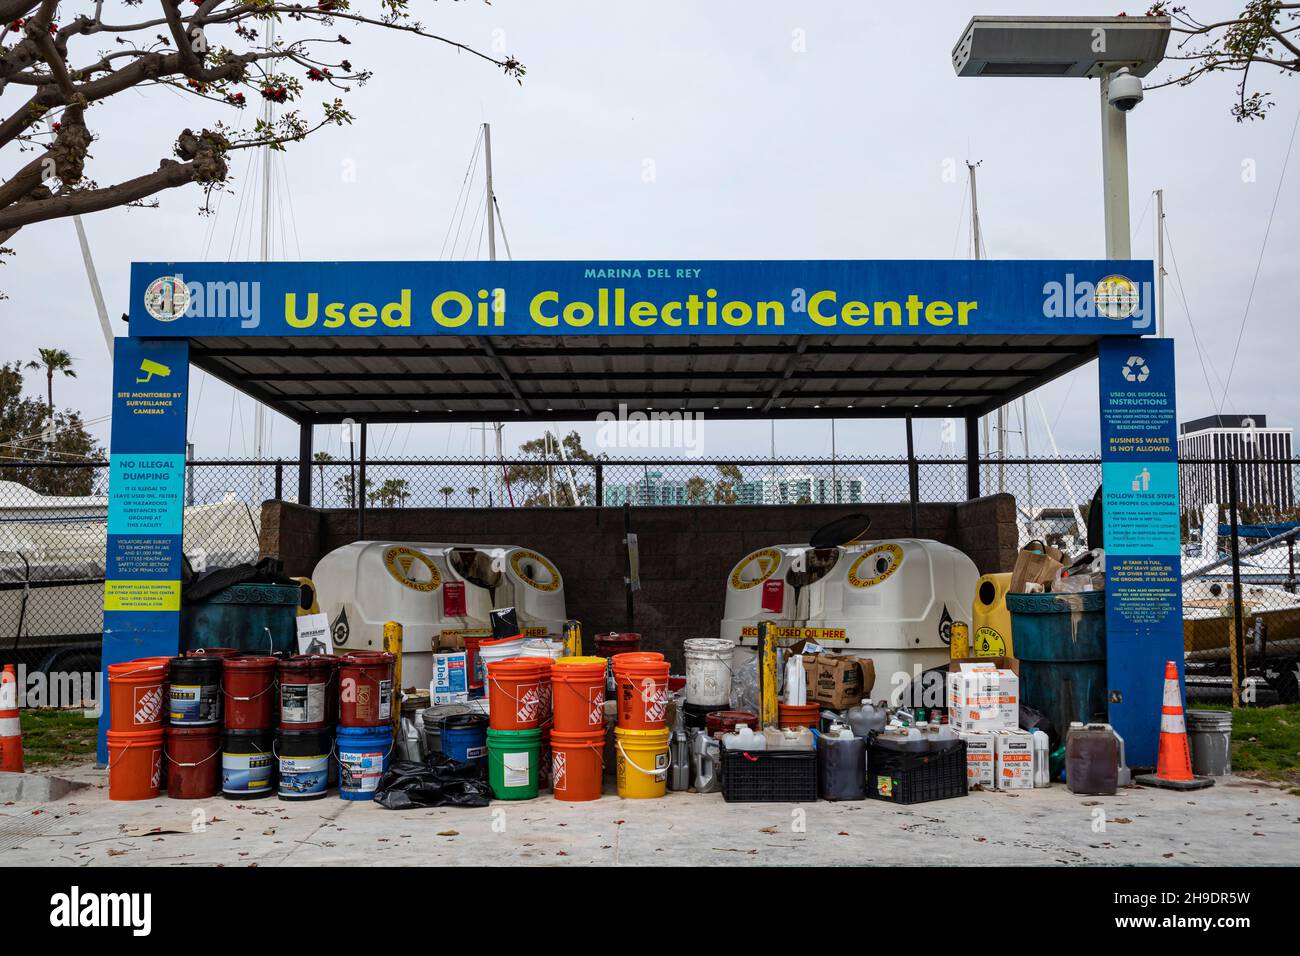 Used Oil Collection Center located in the boatyard in Marina Del Rey, Los Angeles, California, USA Stock Photo